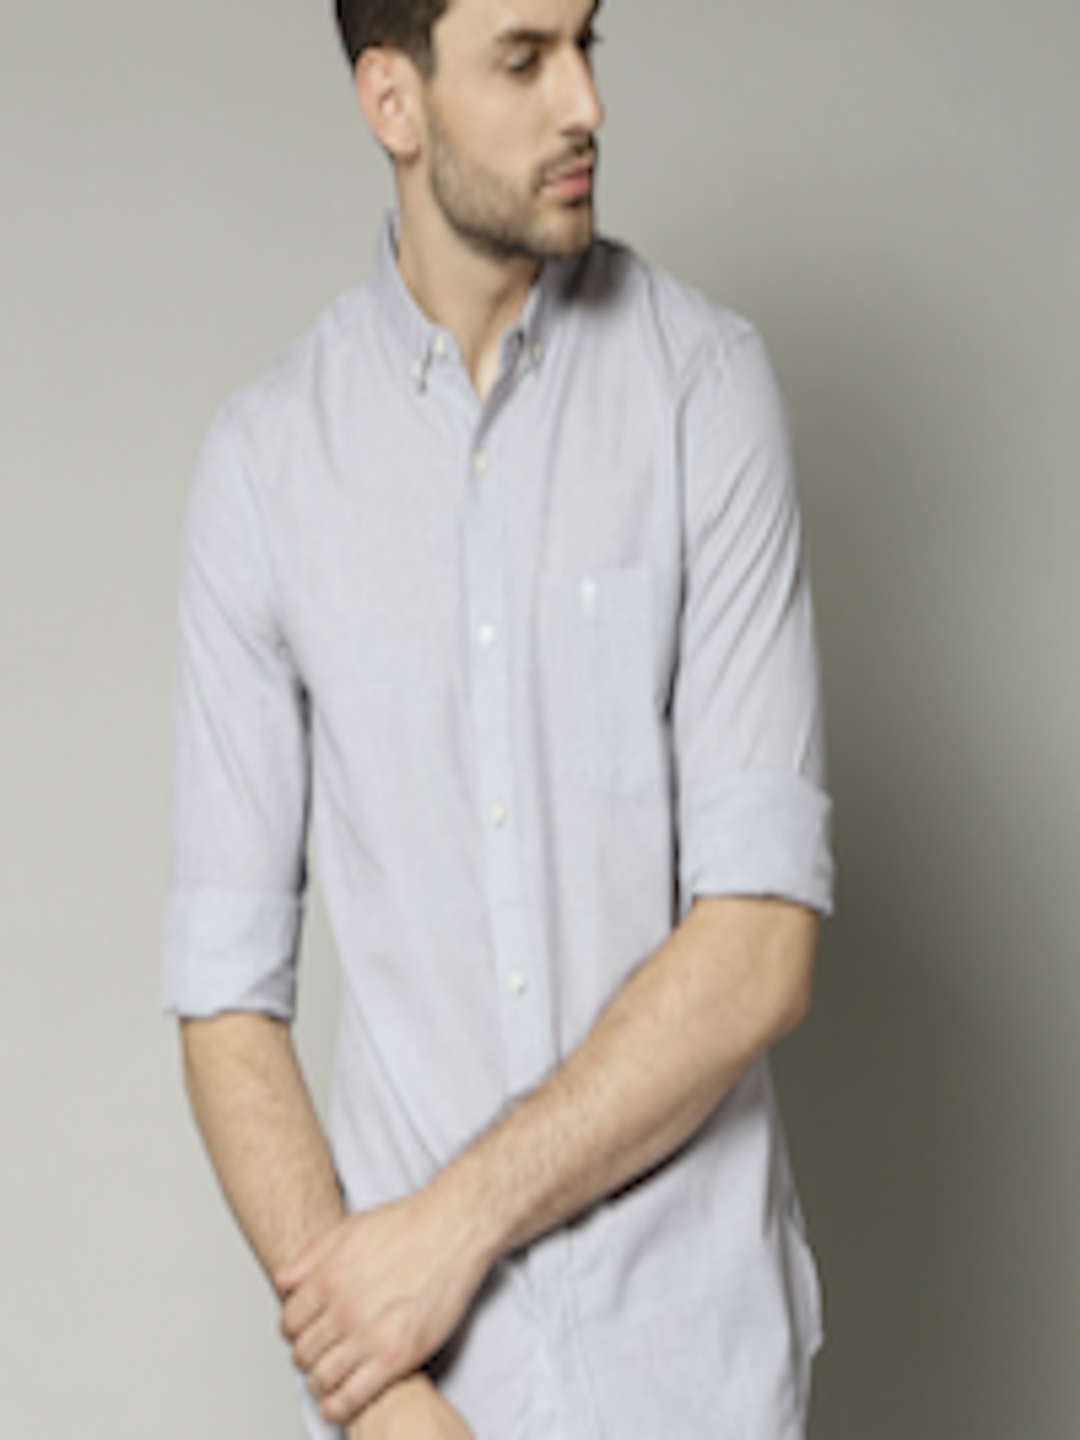 Buy French Connection Light Blue Casual Shirt - Shirts for Men 971439 ...